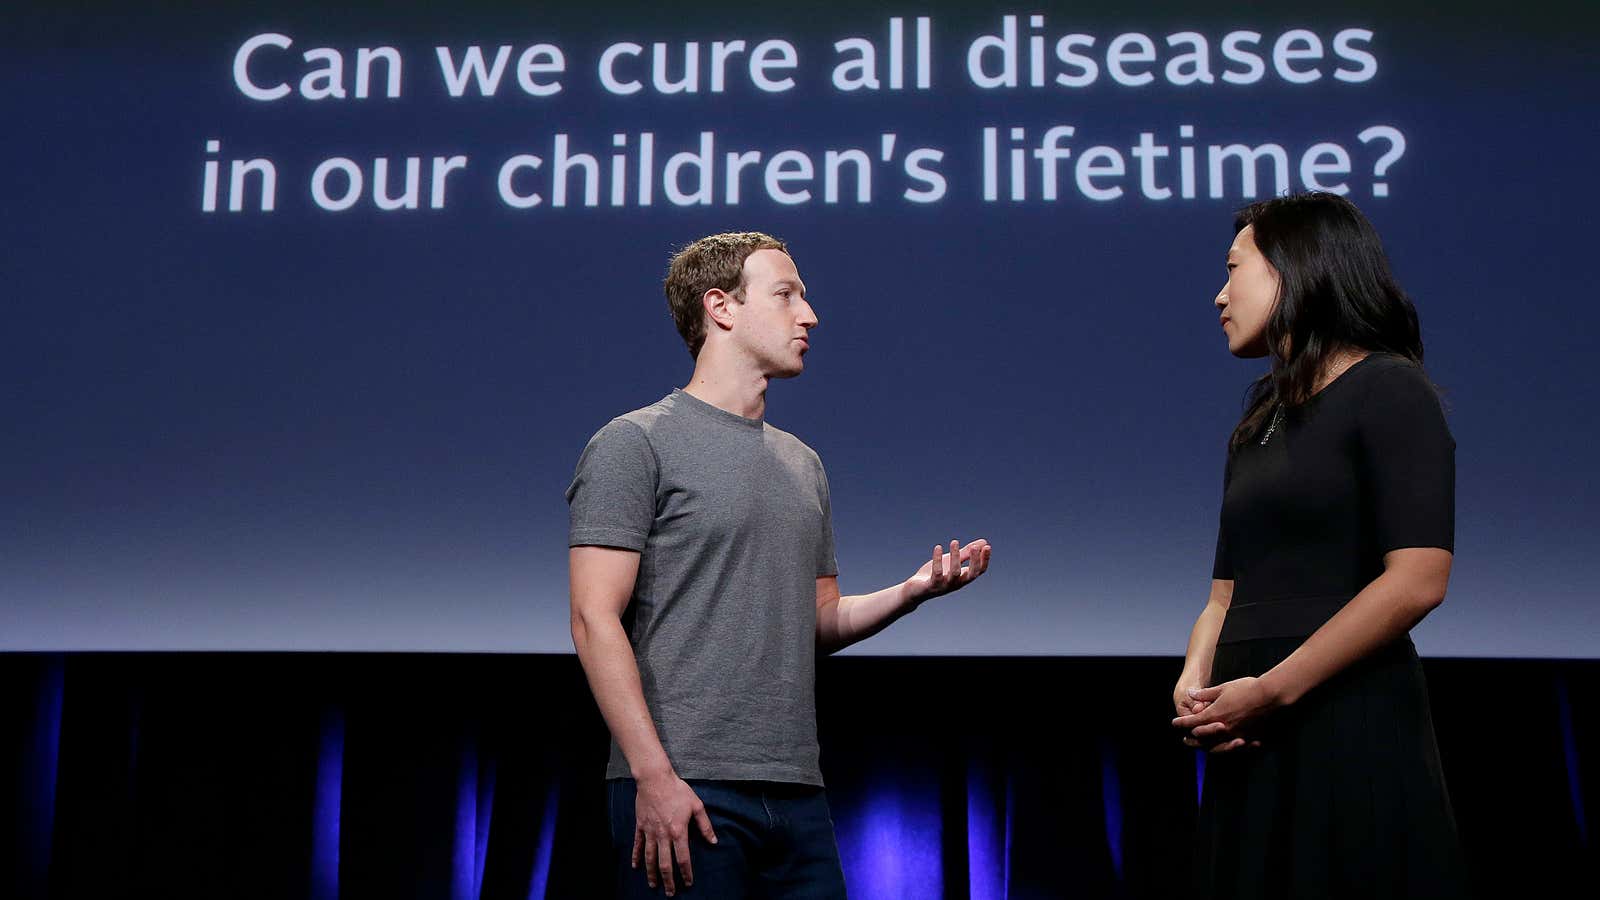 Mark Zuckerberg's young people advice: Focus on building relationships